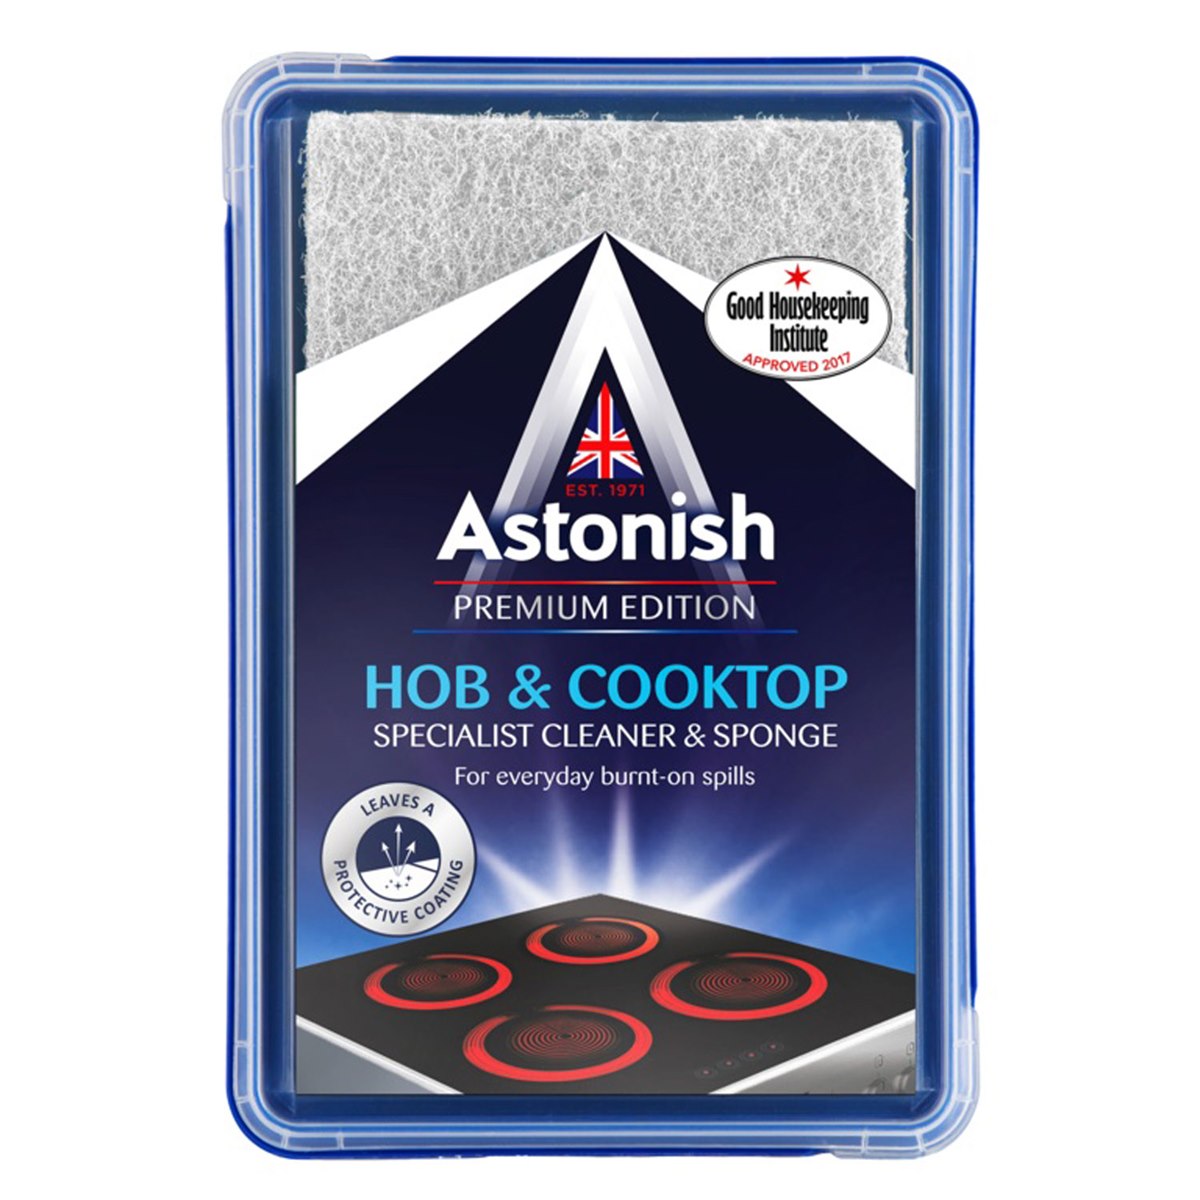 Astonish Premium Edition Specialist Hob and Cookertop Cleaner and Sponge